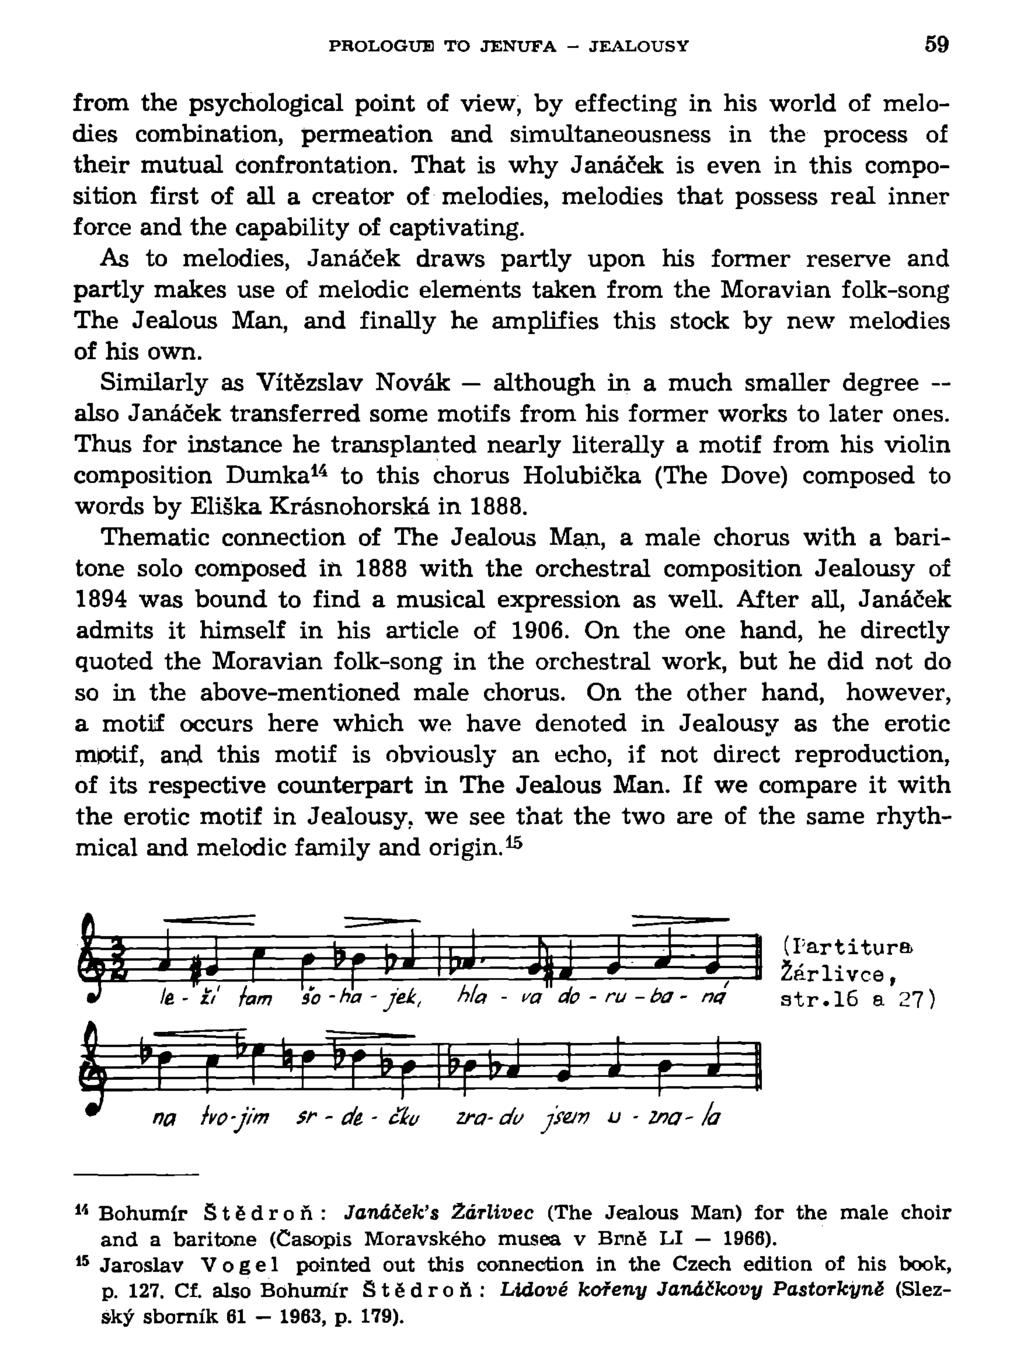 PROLOGUE TO JENUFA - JEALOUSY 59 from the psychological point of view, by effecting in his world of melodies combination, permeation and simultaneousness in the process of their mutual confrontation.